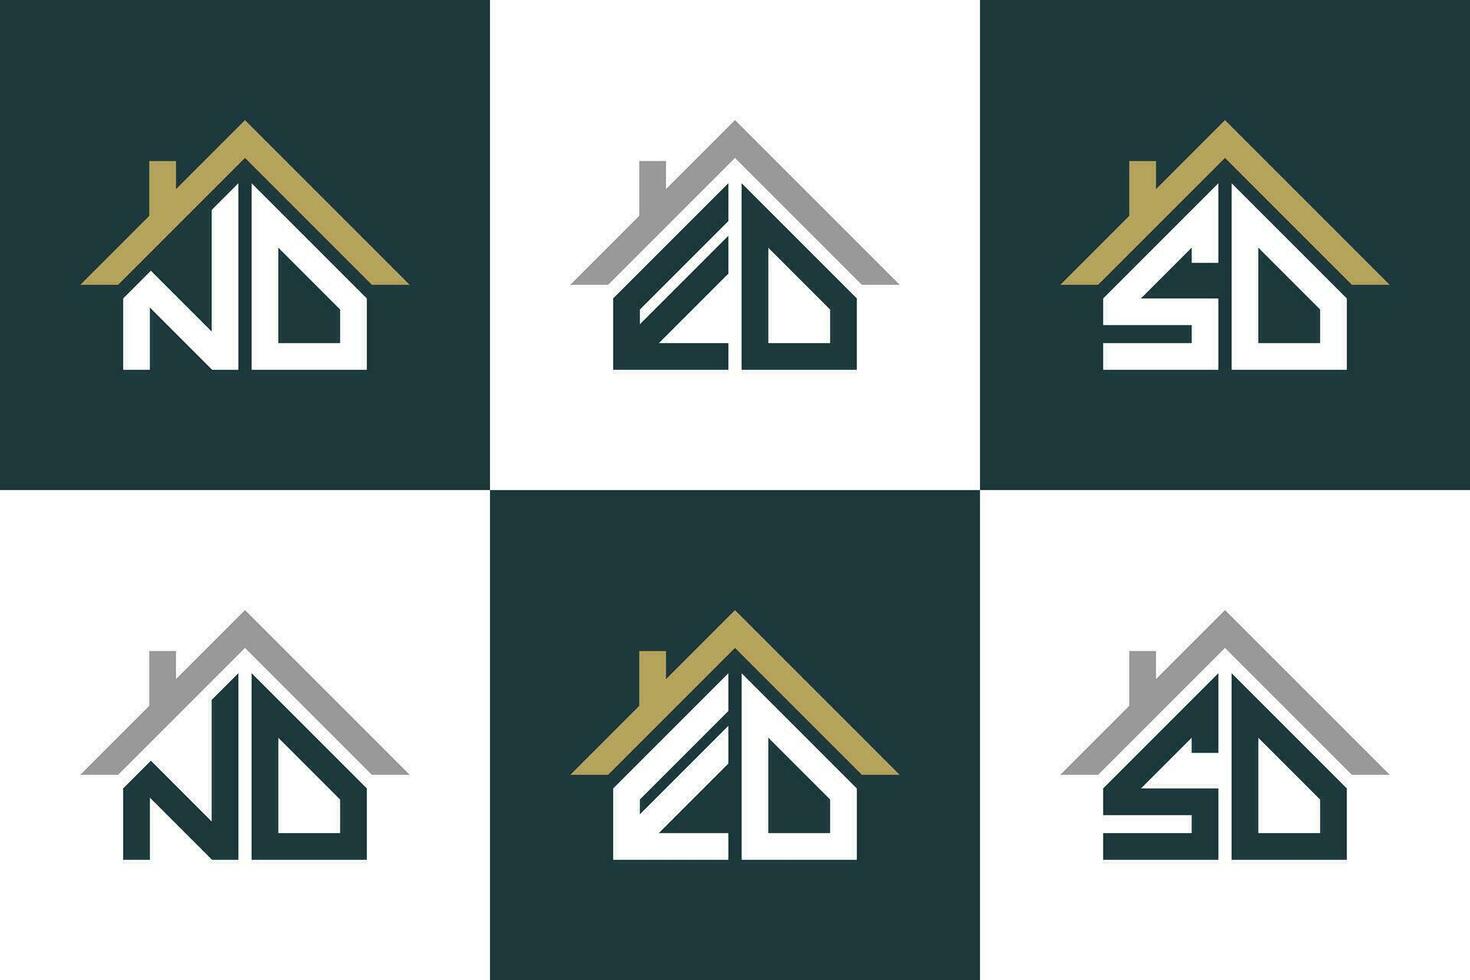 set of letter nd,ed,sd logo design with house illusration concept vector